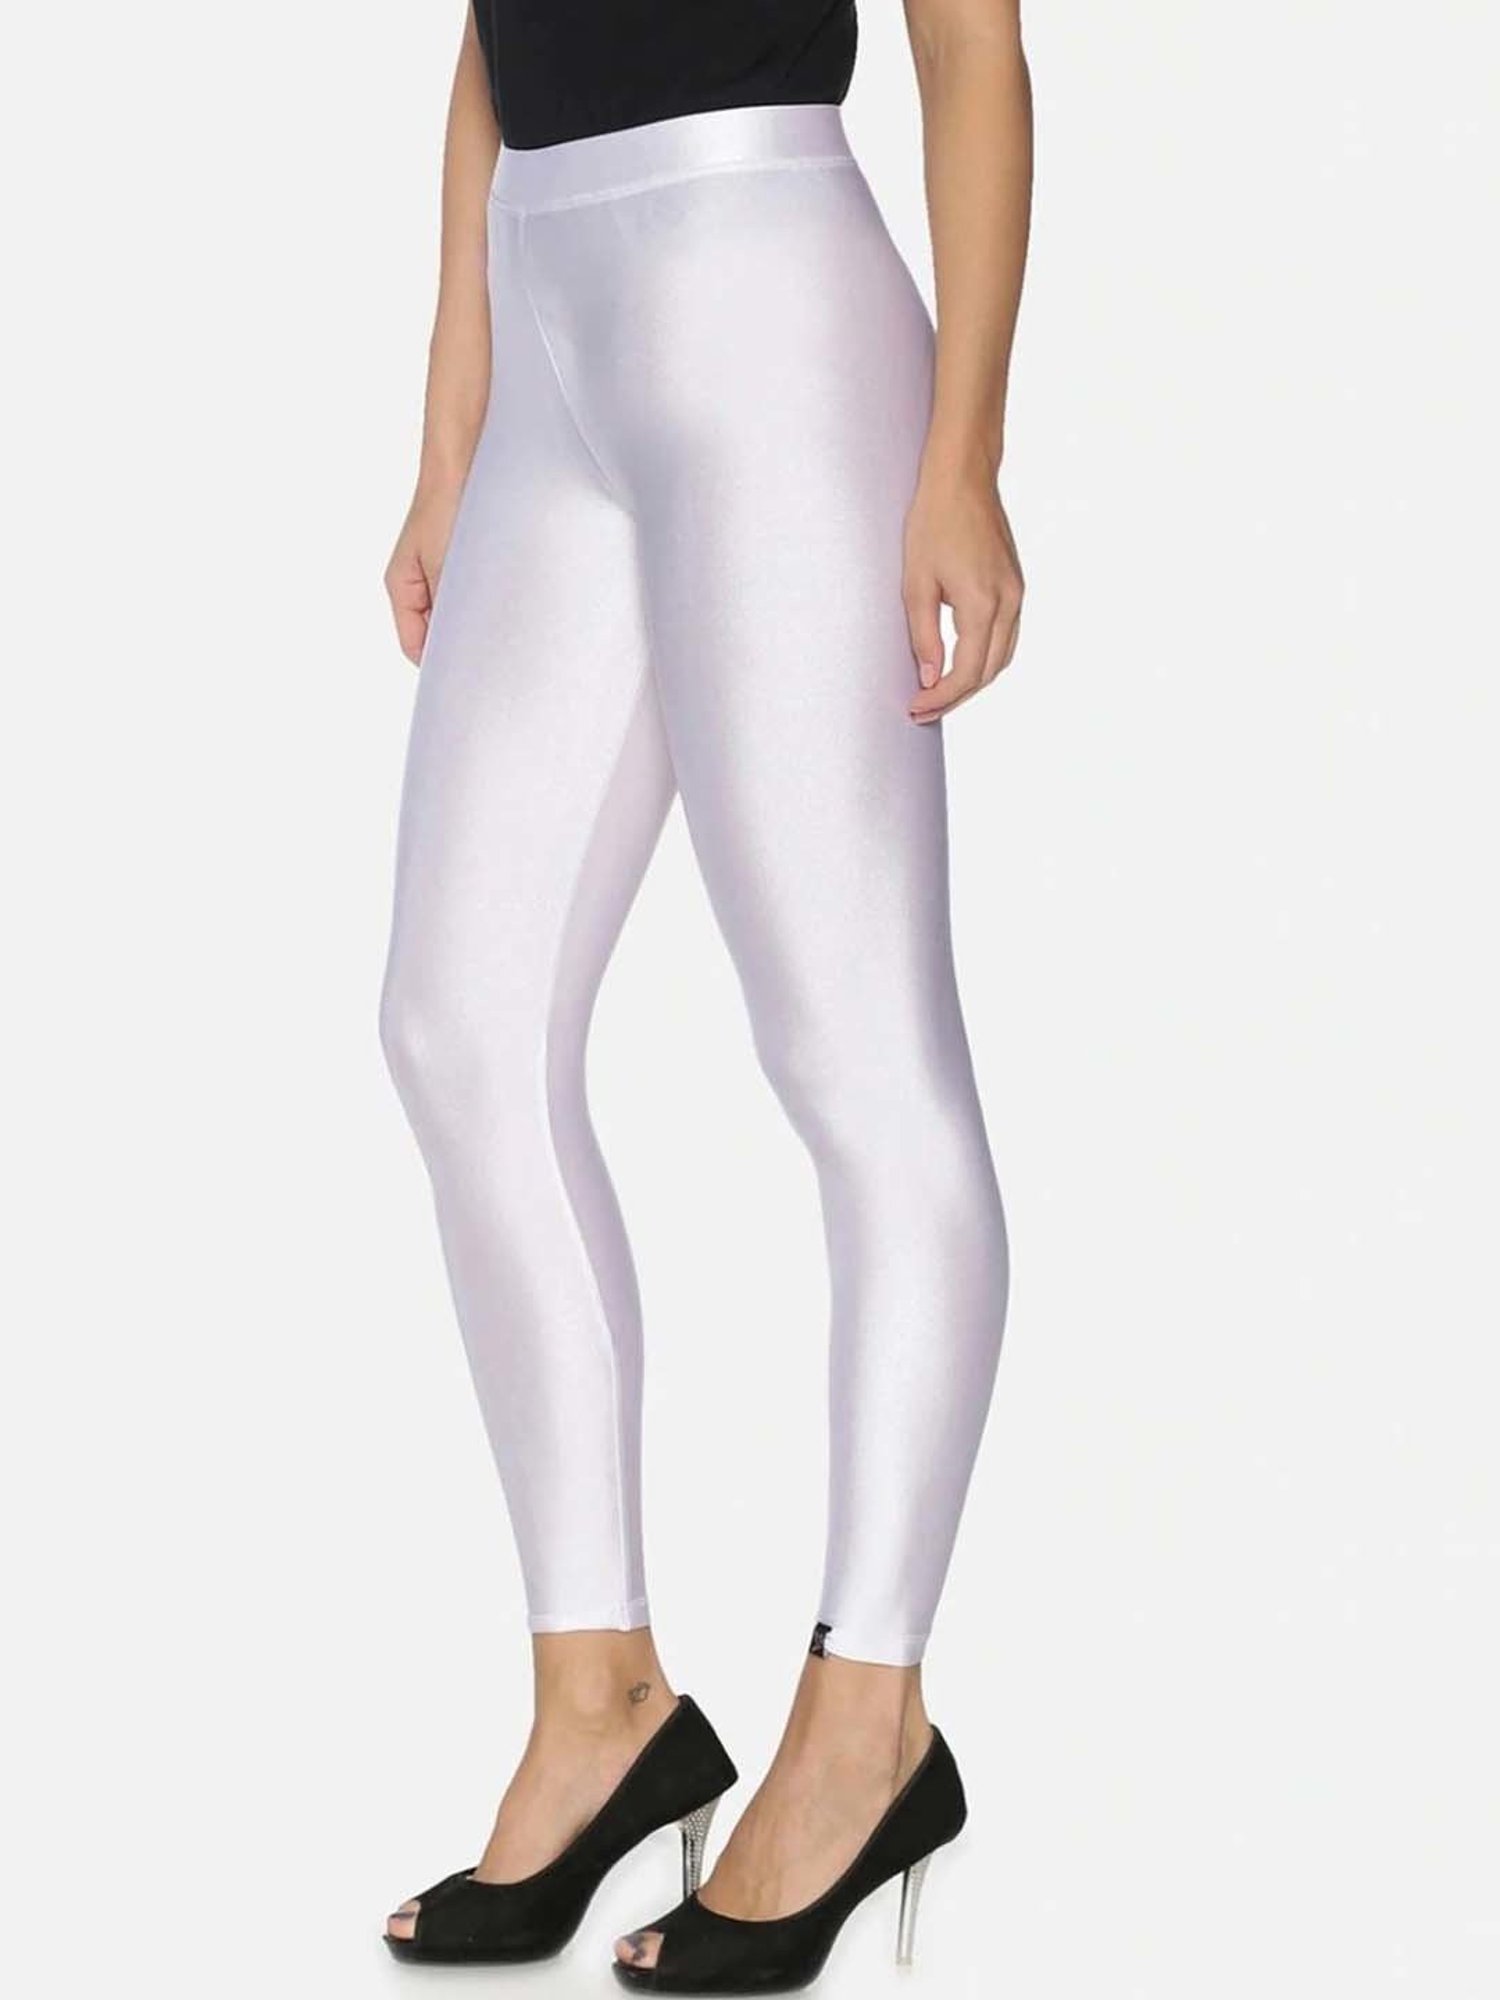 CLZOUD Yoga Pants for Women White Nylon,Spandex Leggings with Pockets for  Women Non See Through Workout High Waisted Running Yoga Pants - Walmart.com